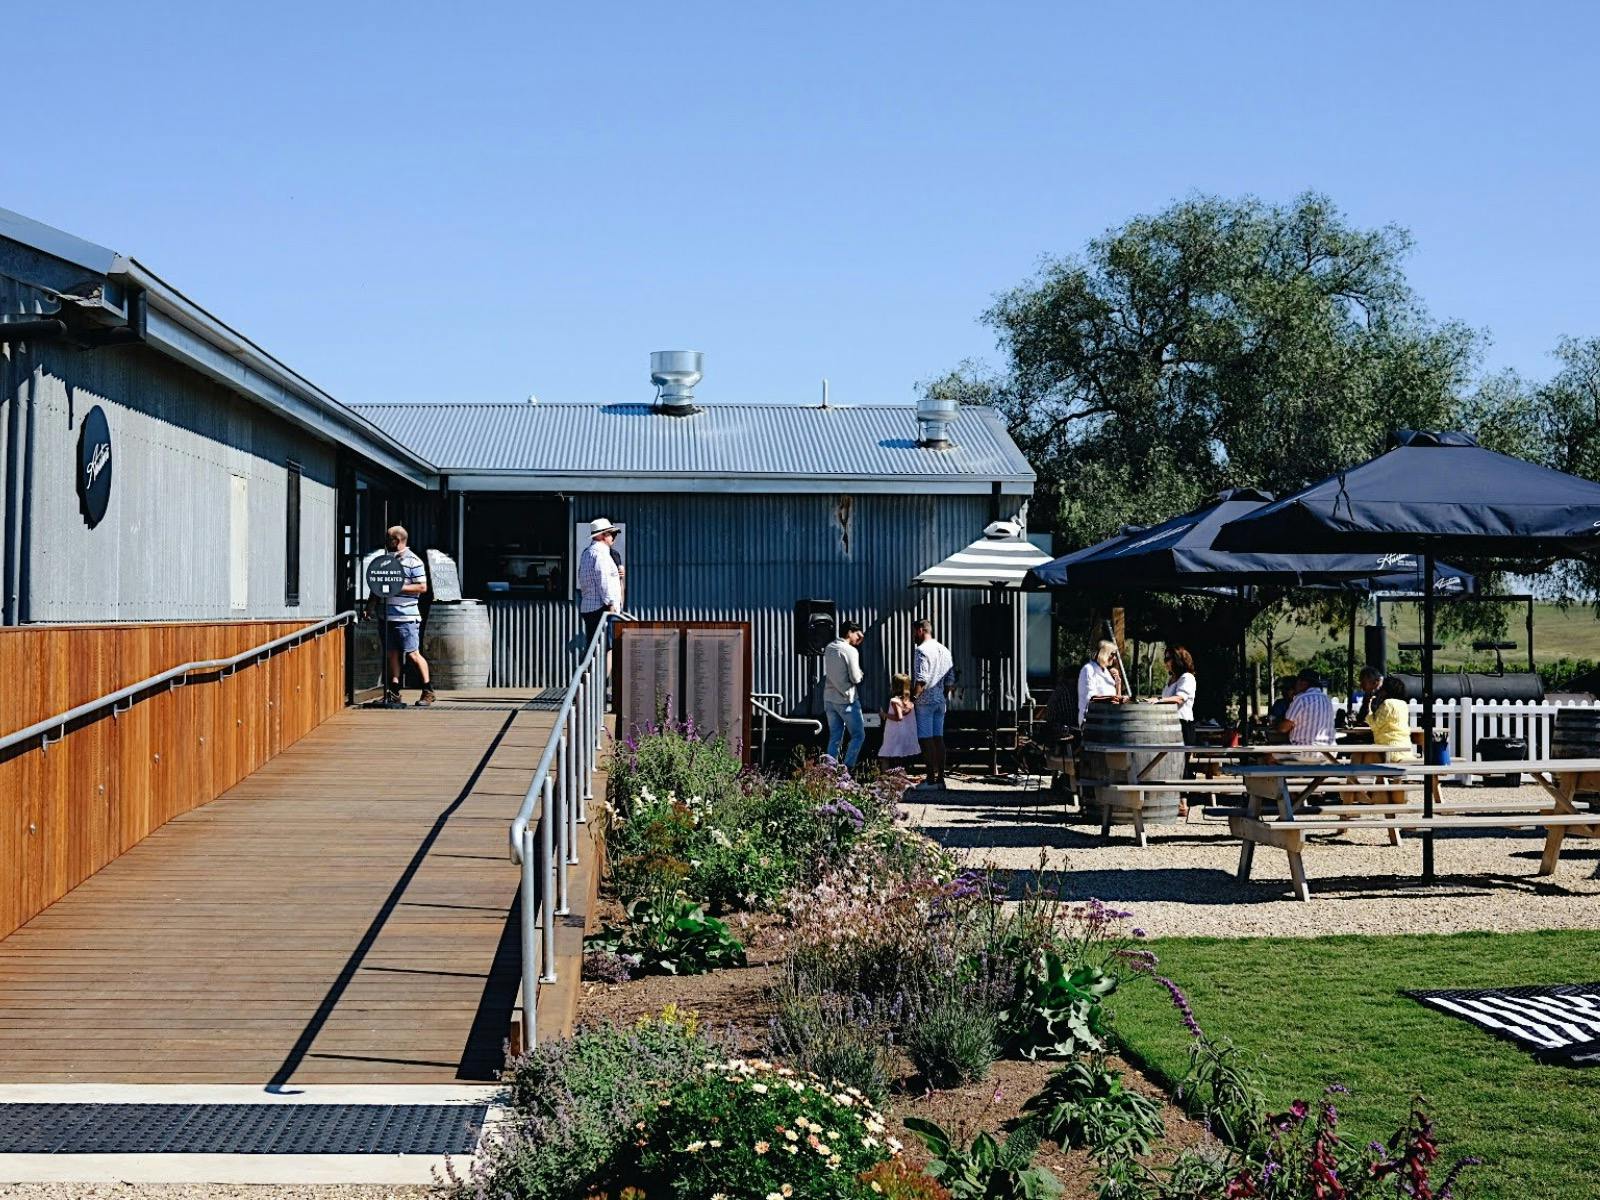 The entrance and outdoor dining at Austins Wines.